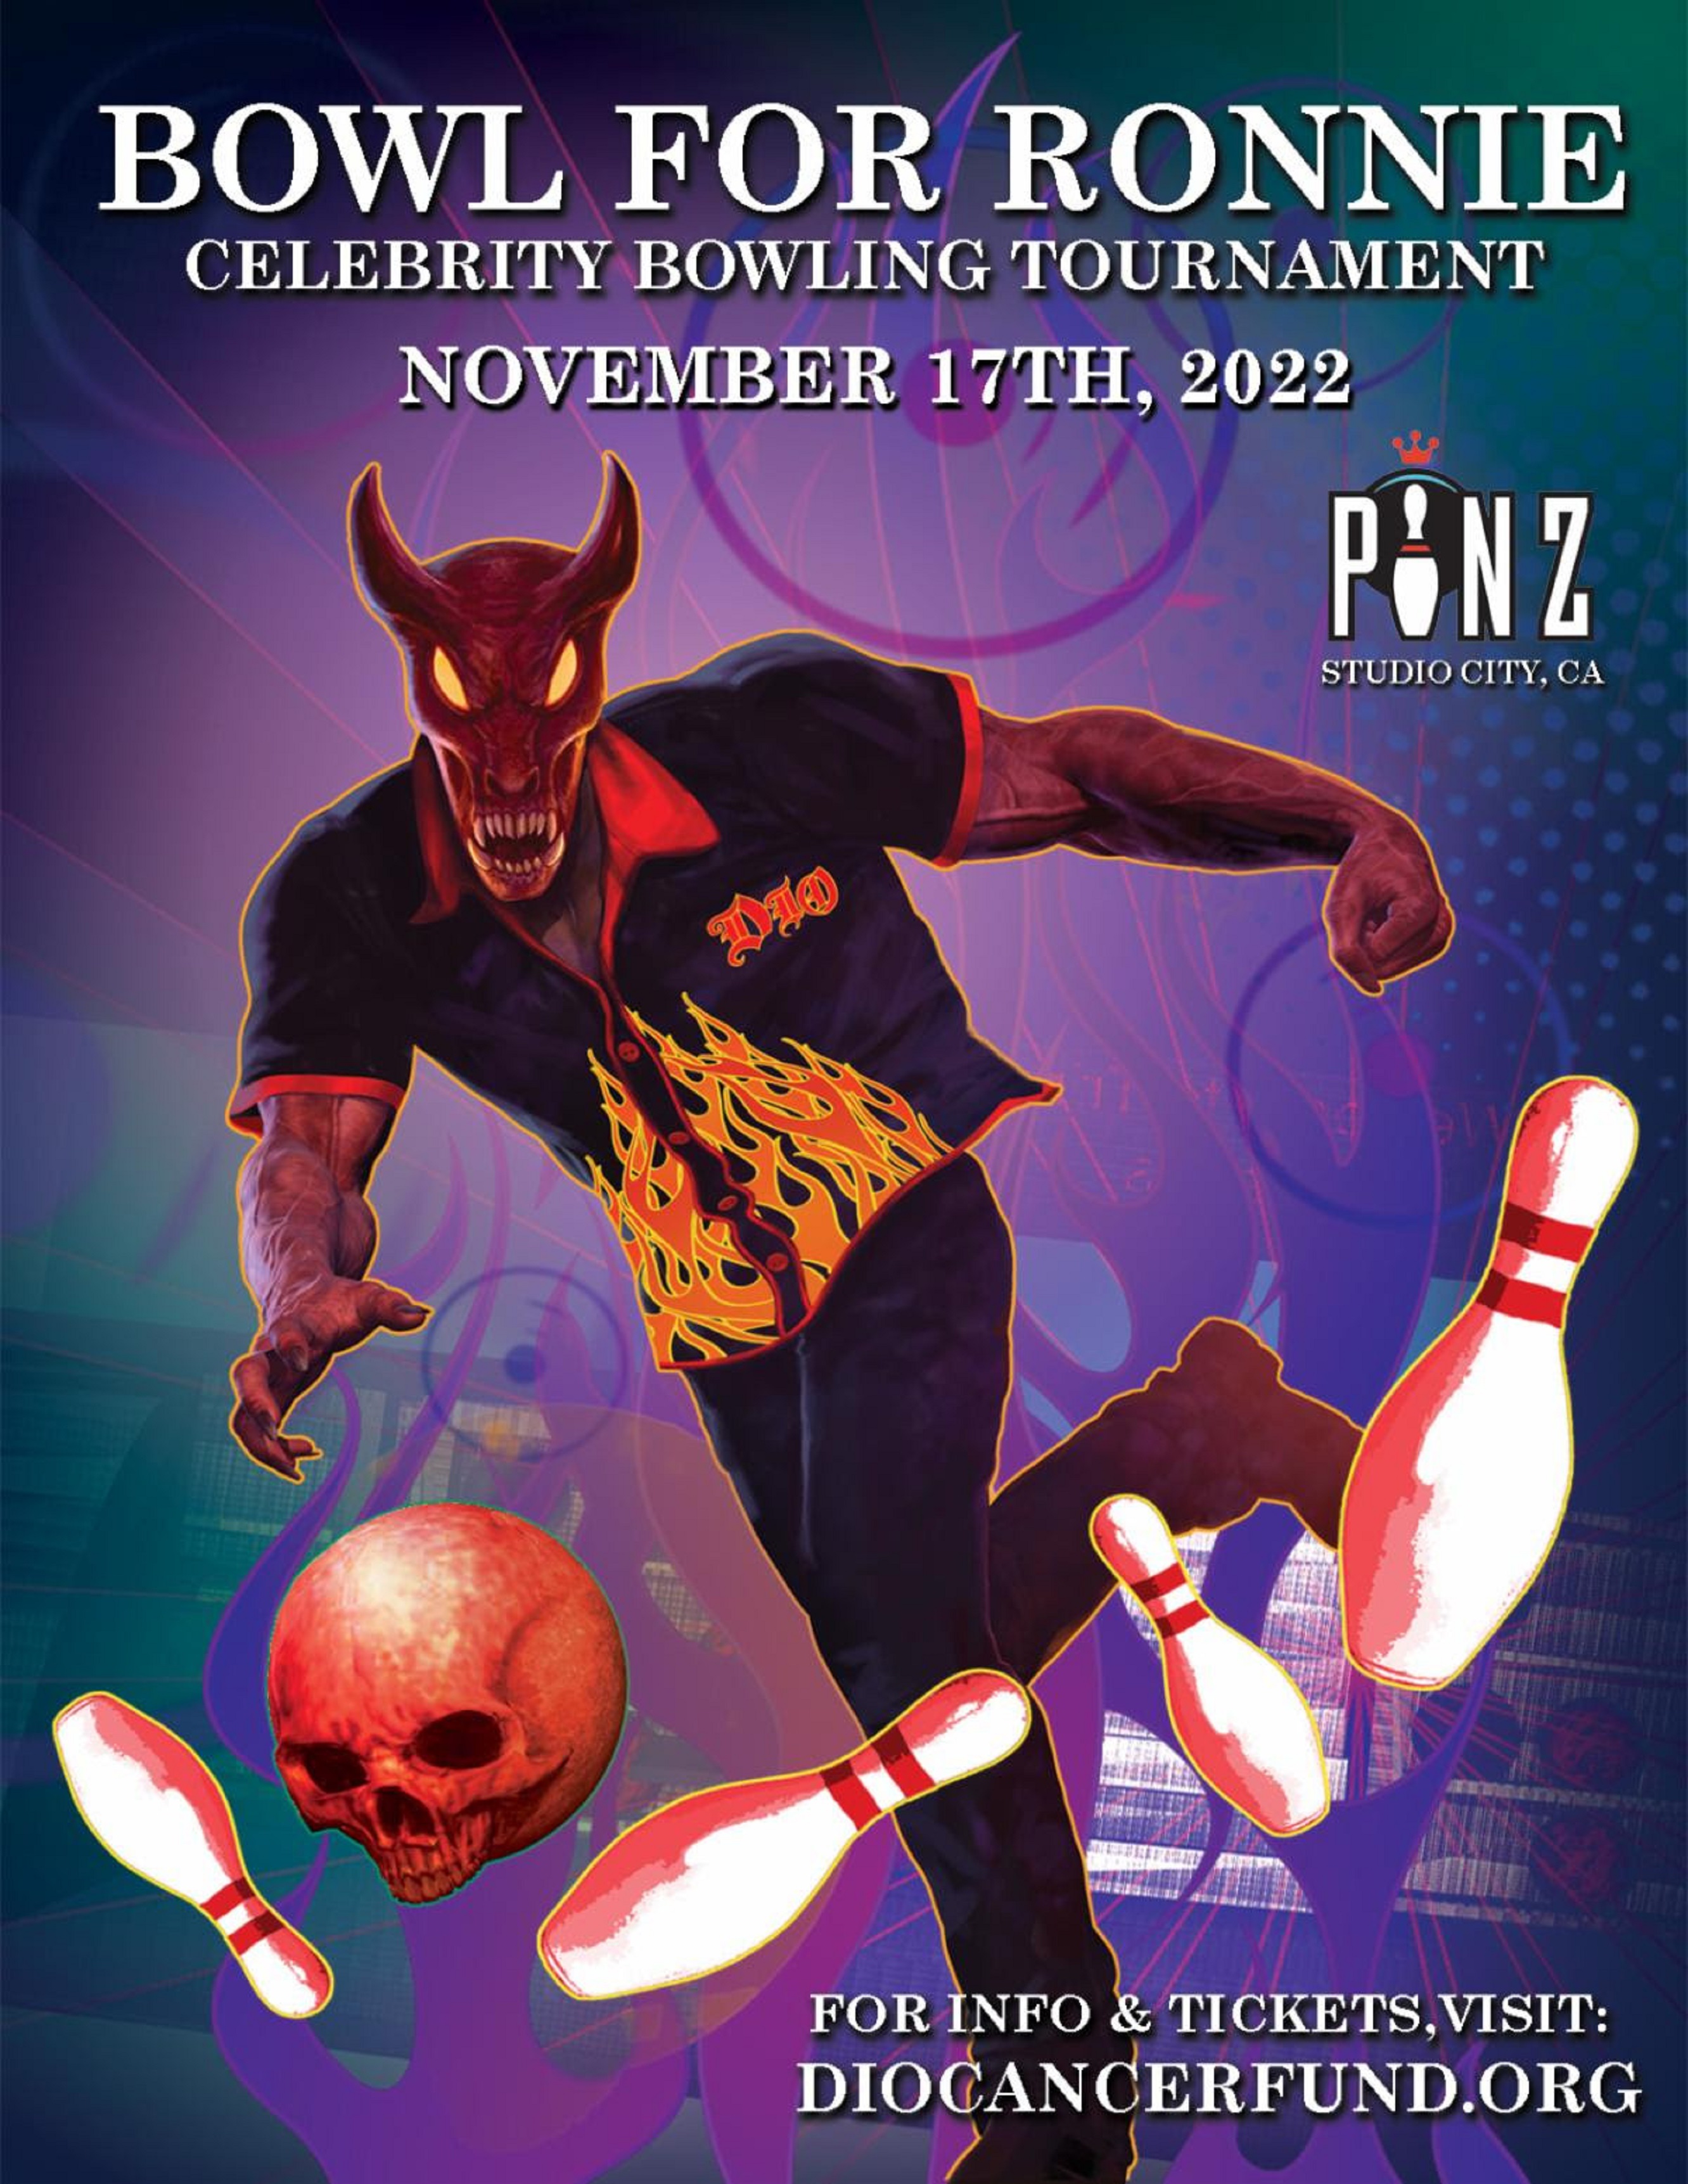 "BOWL FOR RONNIE" "BOWL FOR RONNIE" CELEBRITY BOWLING PARTY’S POST-COVID RETURN BRINGS IN MORE THAN $72,000 FOR RONNIE JAMES DIO STAND UP AND SHOUT CANCER FUND